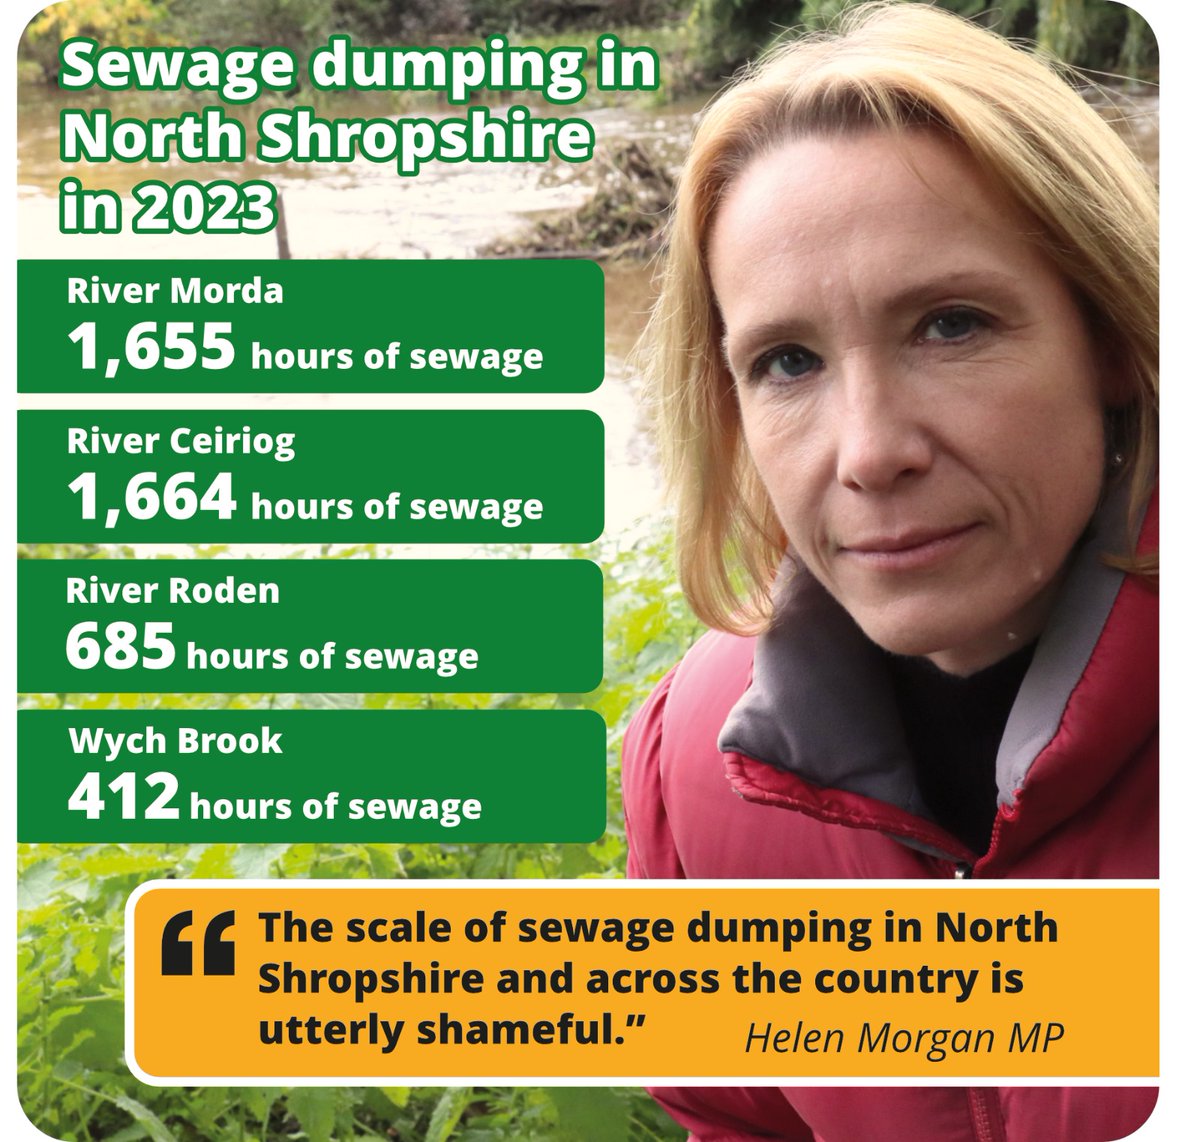 The scale of sewage dumping in rivers and waterways across North Shropshire is utterly shameful. 

I've been out to test water myself, and seen parts of the River Morda which are nearly black downstream.

The Government are letting people down by allowing this to continue.